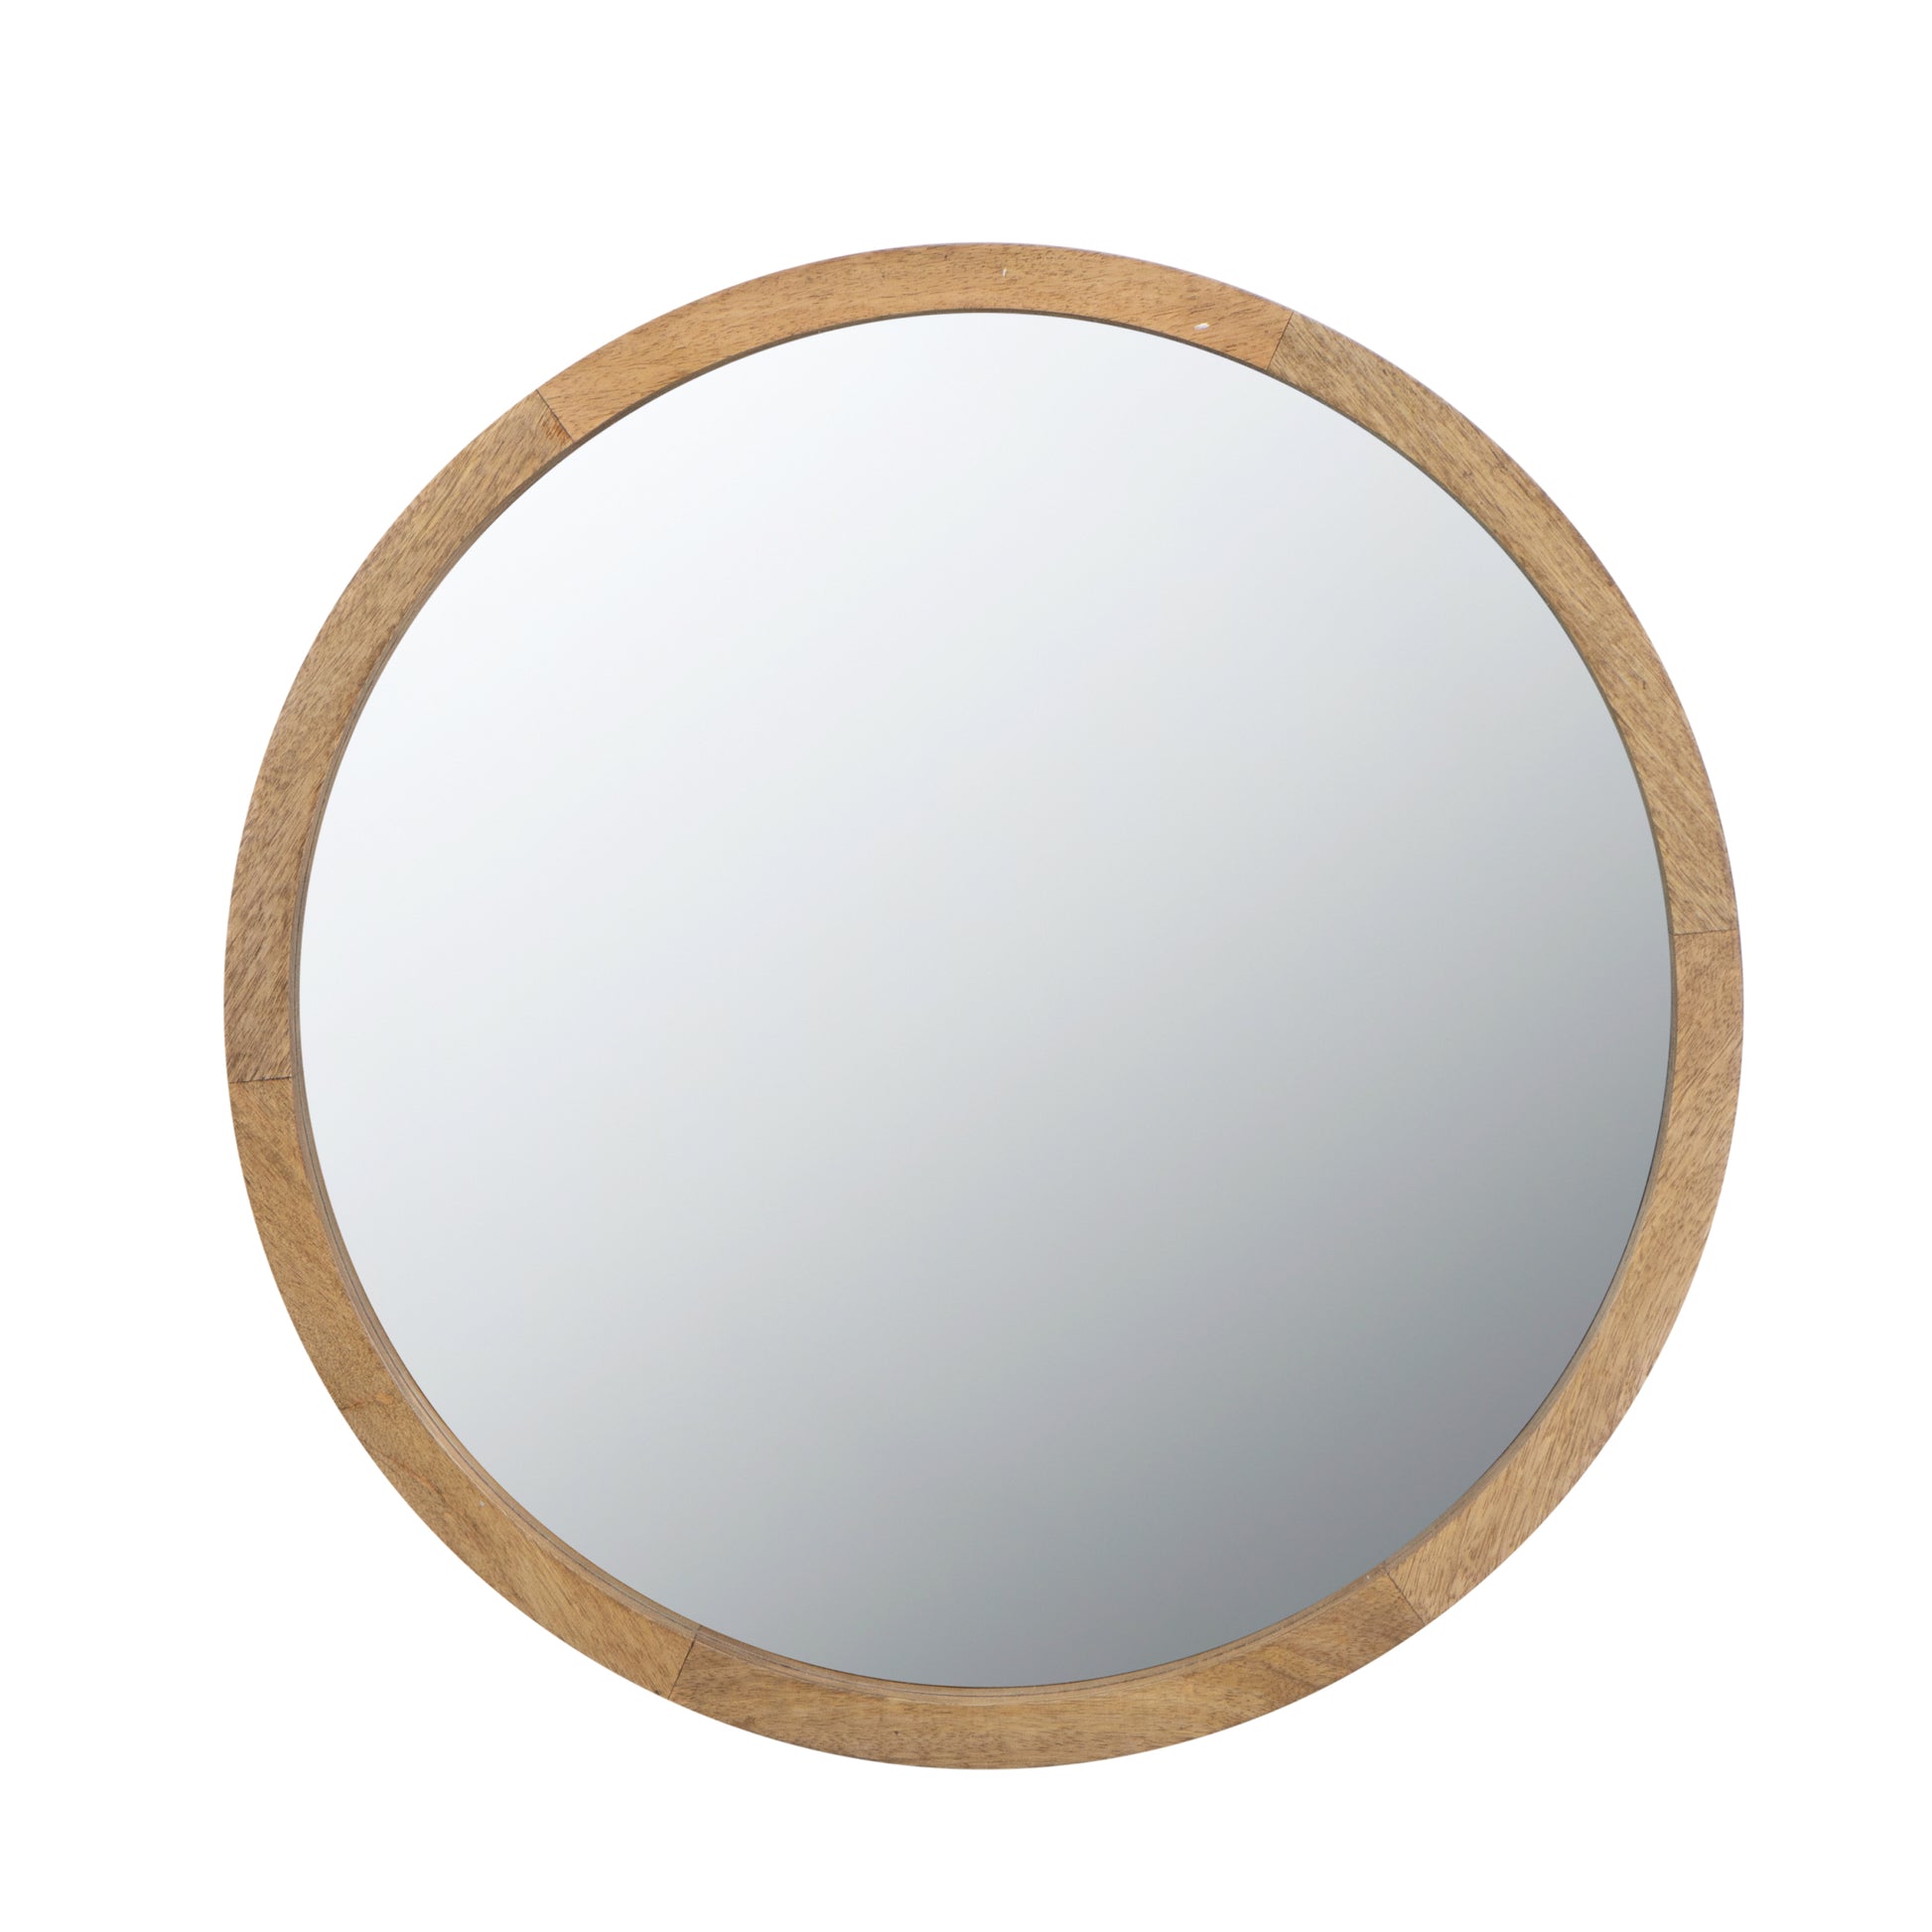 20" x 20" Circle Wall Mirror with Wooden Frame, Wall brown-wood+glass